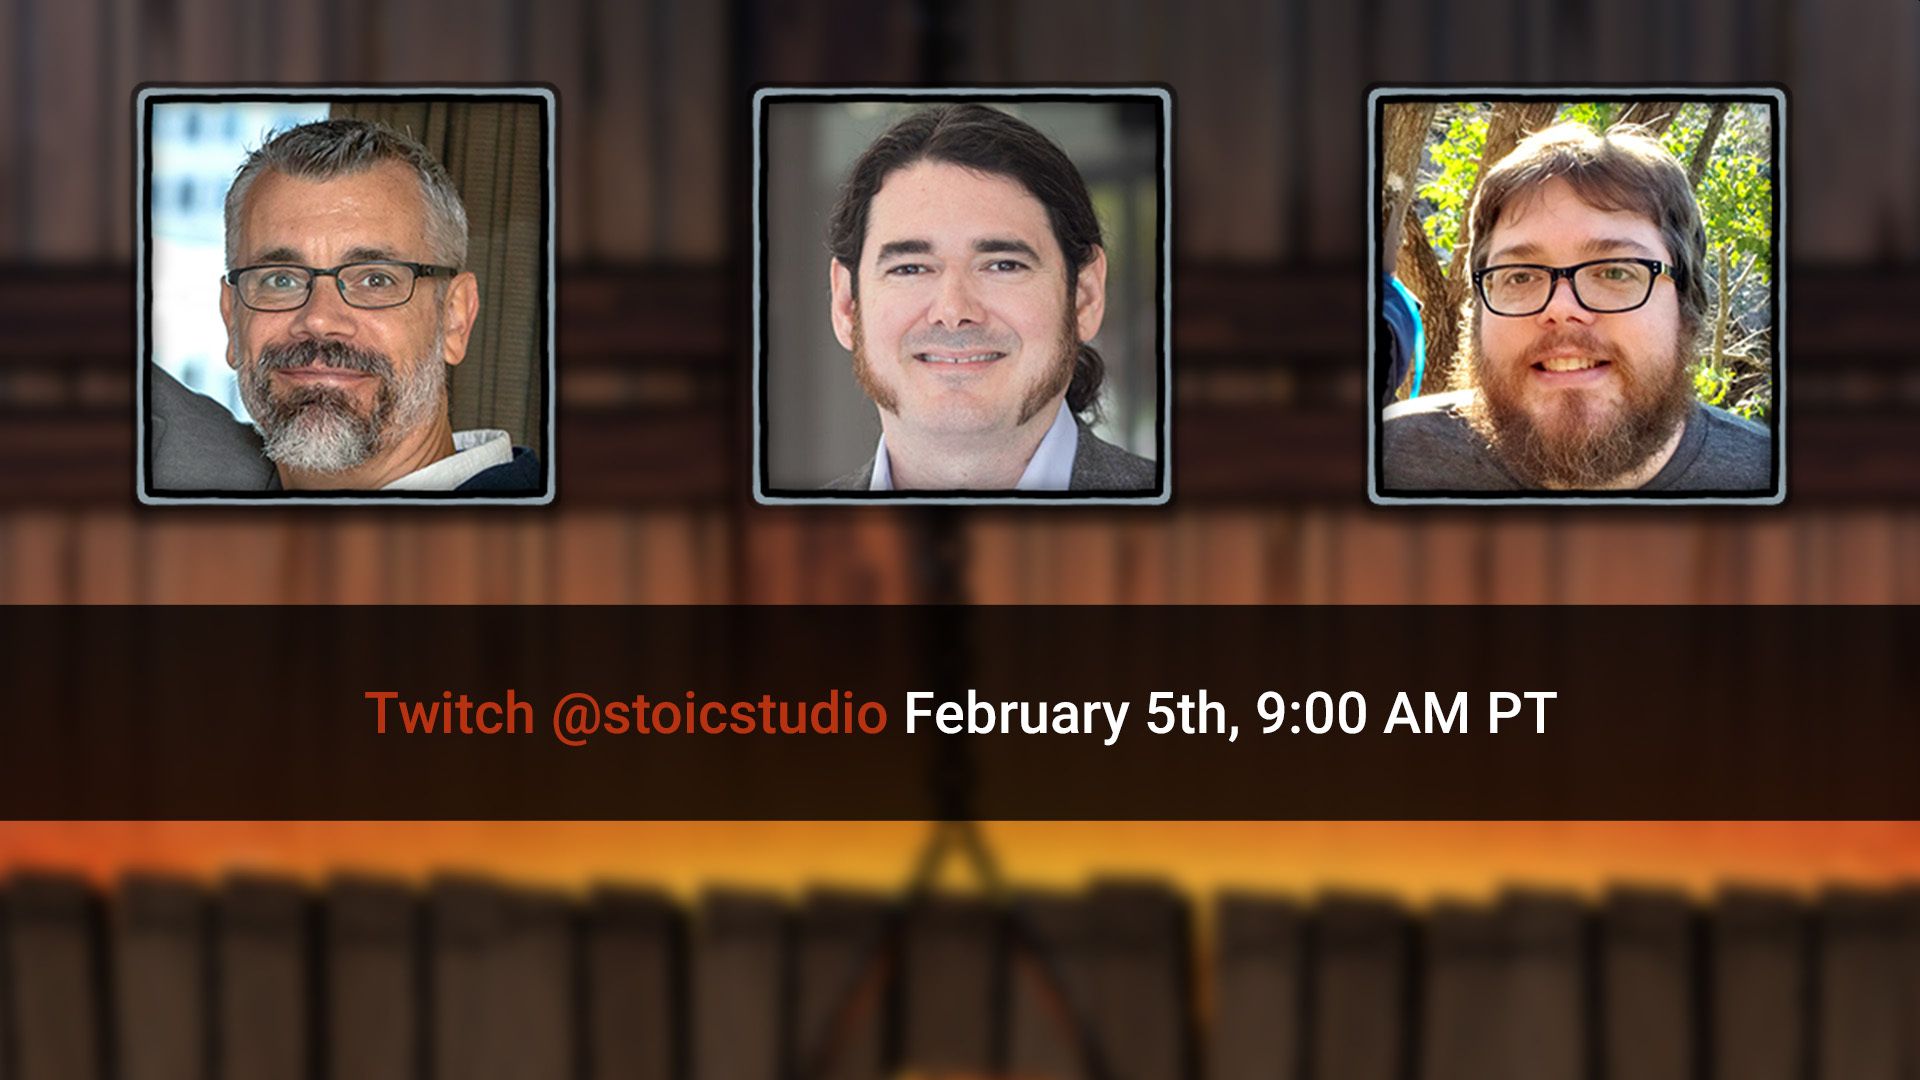 Fireside Dev Chat this Friday!